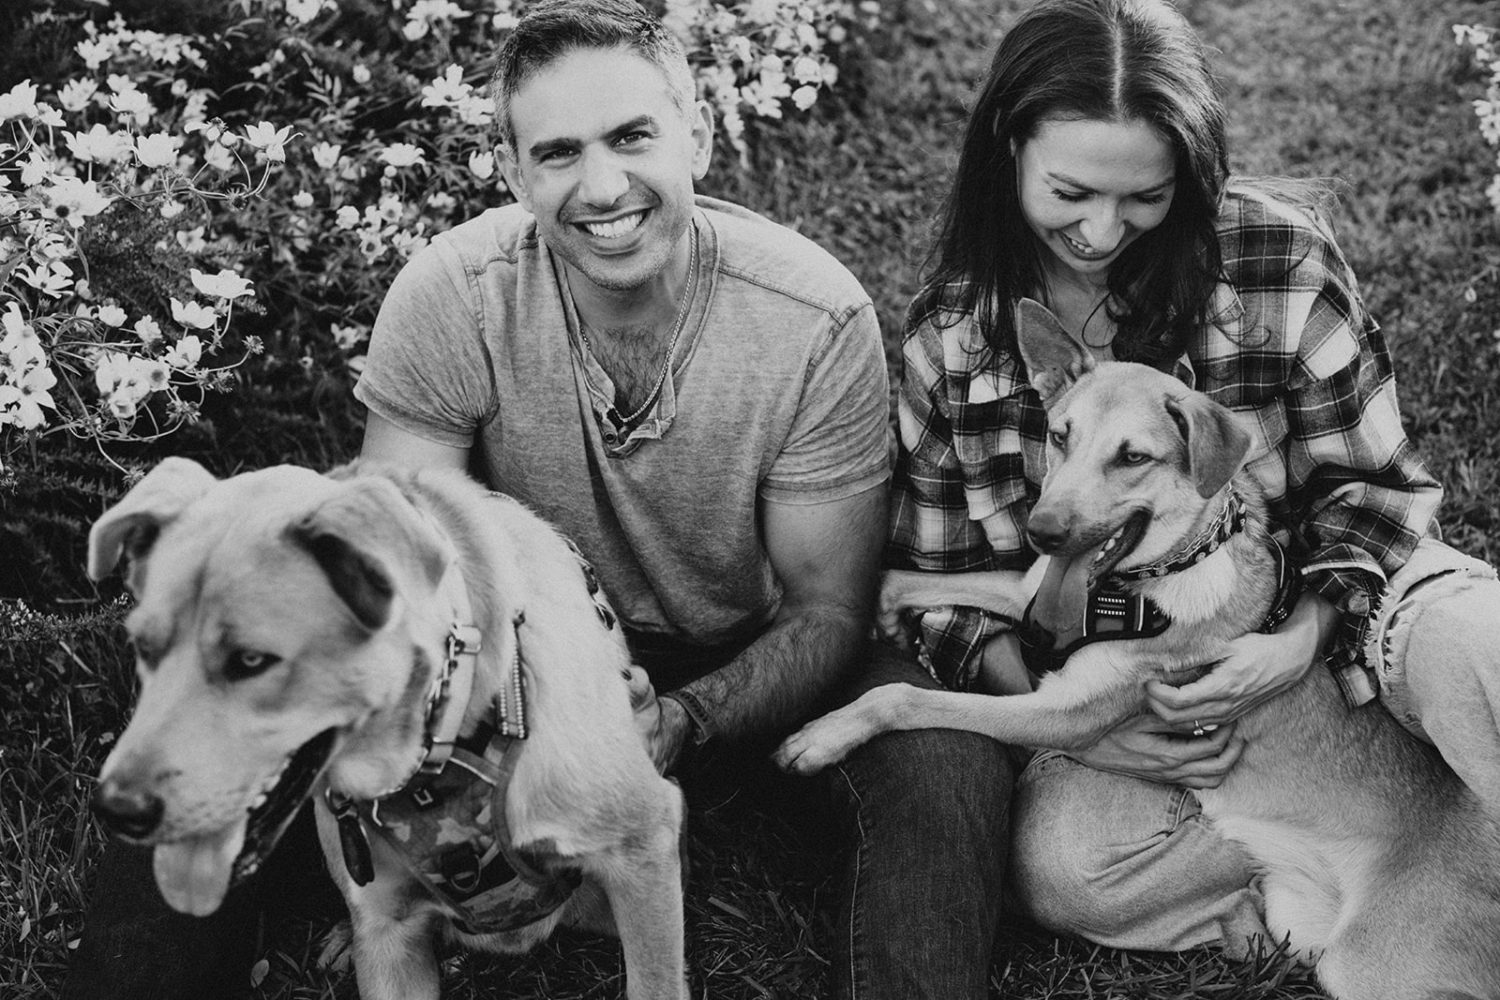 couple takes engagement photos with dogs in wildflower field